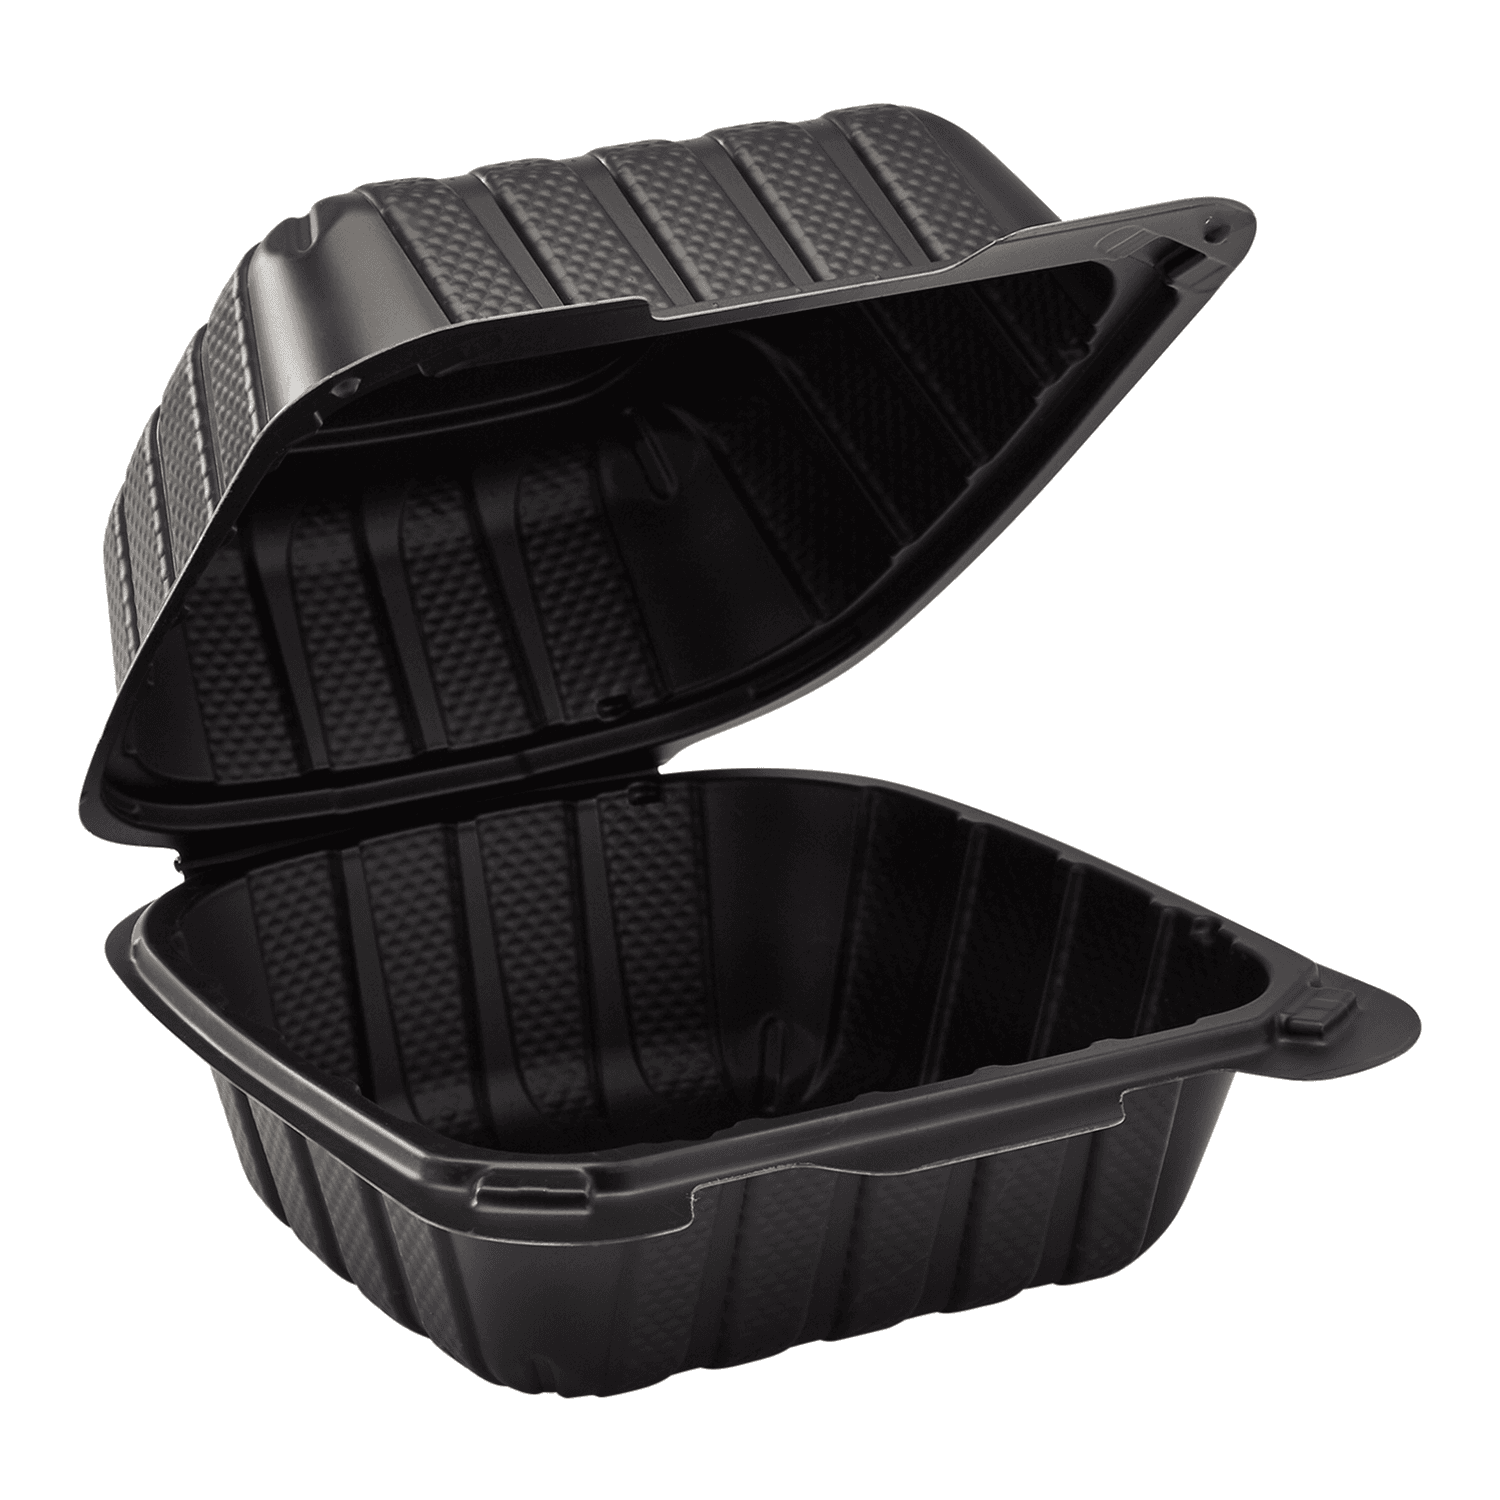 Karat Earth 6" x 6" Mineral Filled PP Hinged Container, Black - 400 pcs